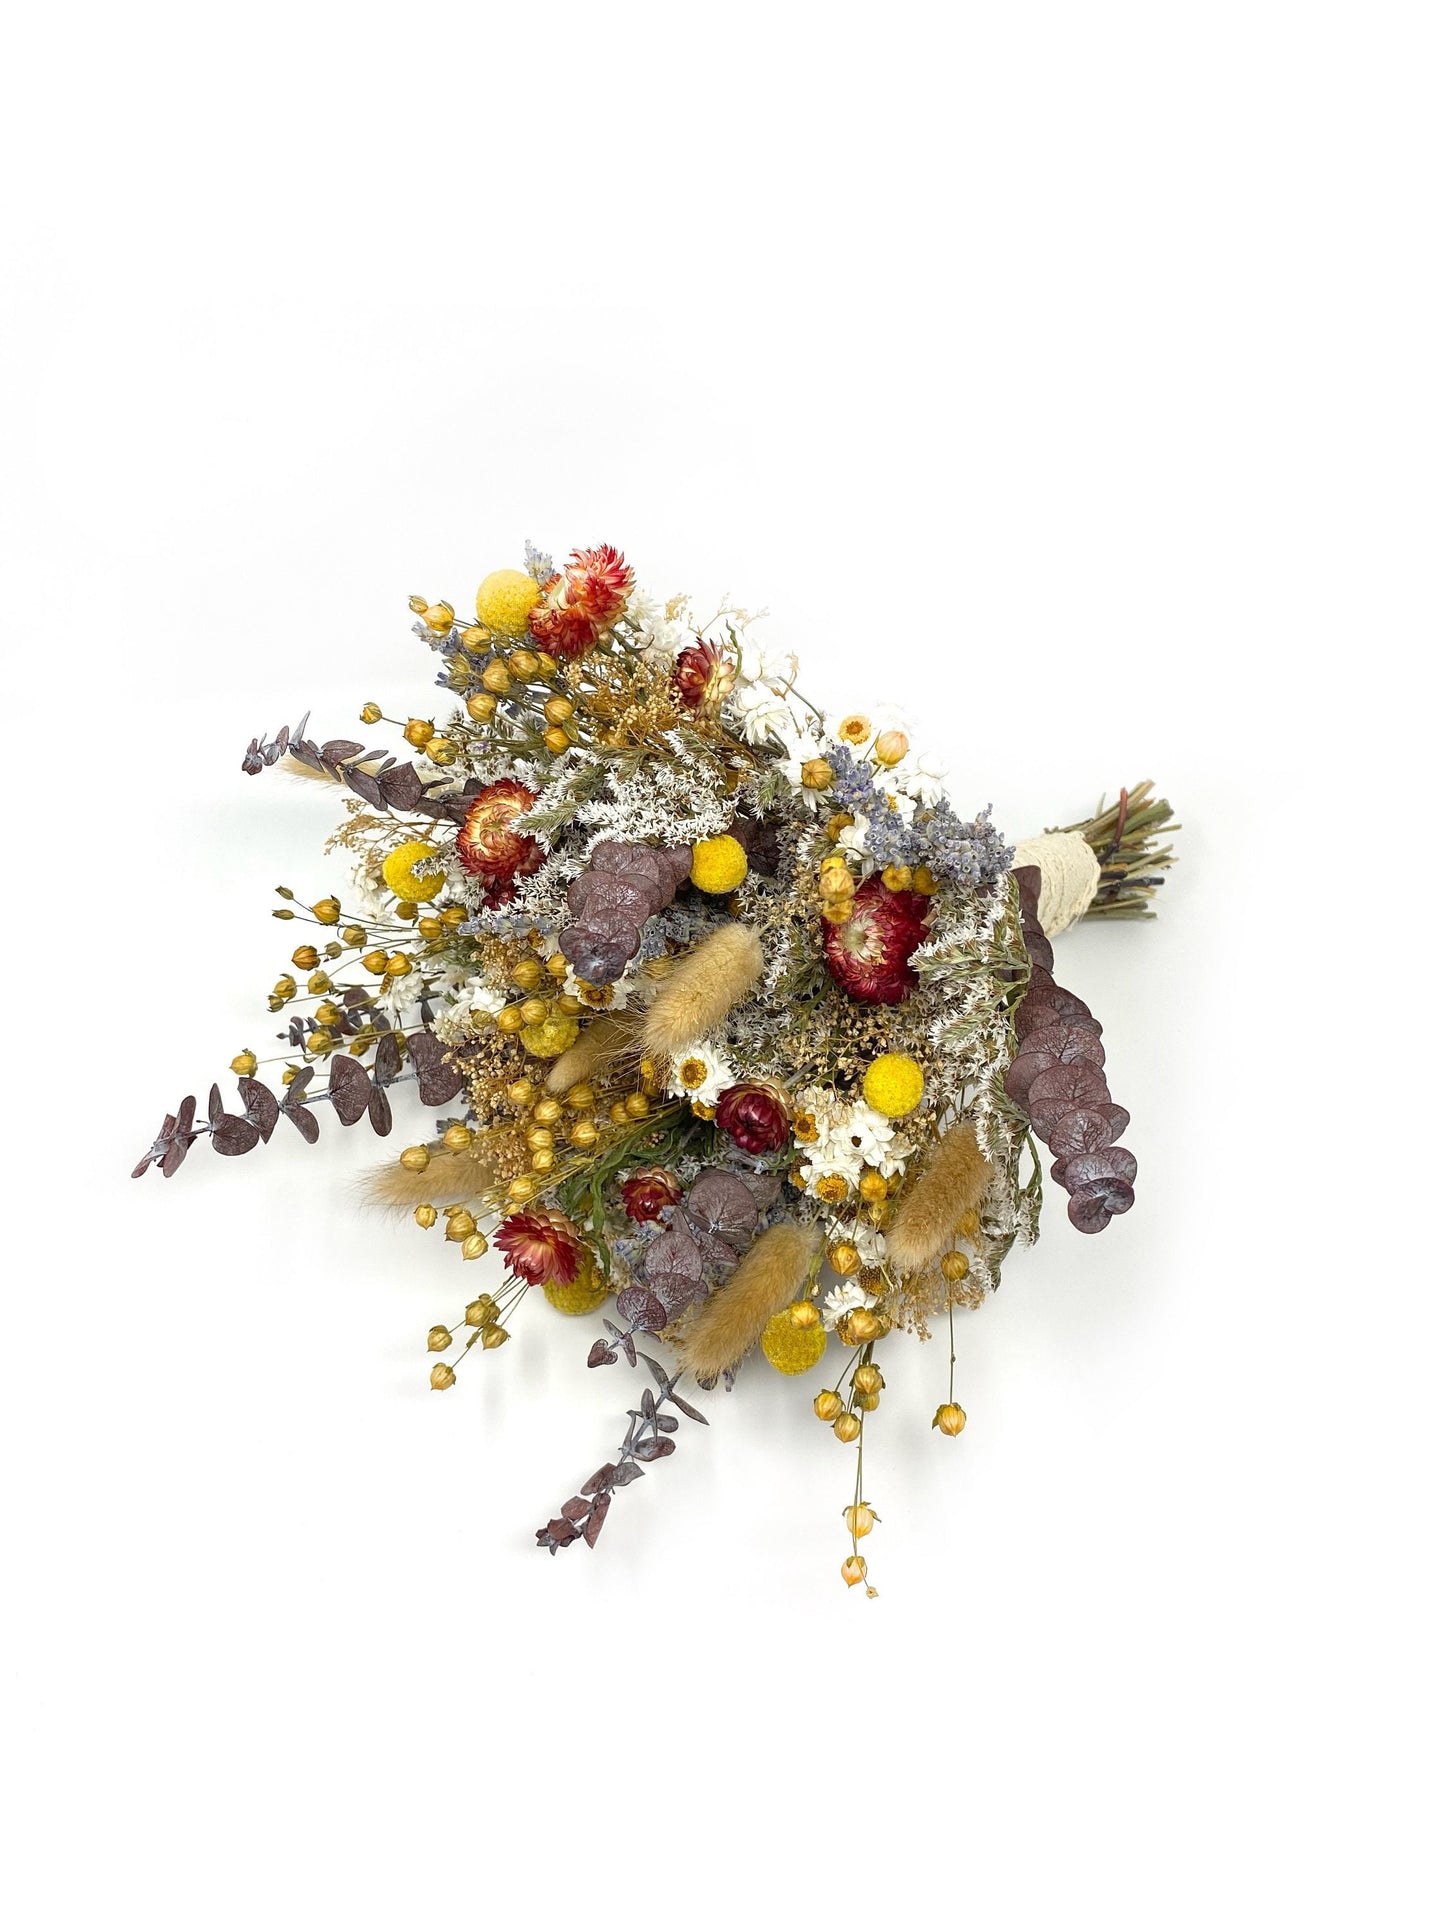 Wedding Bouquet, Fall, Dried Flowers, Preserved Floral, Rustic, Ammobium, bunny tails, Bridal, Red, Throw Bouquet, Strawflowers, Yellow